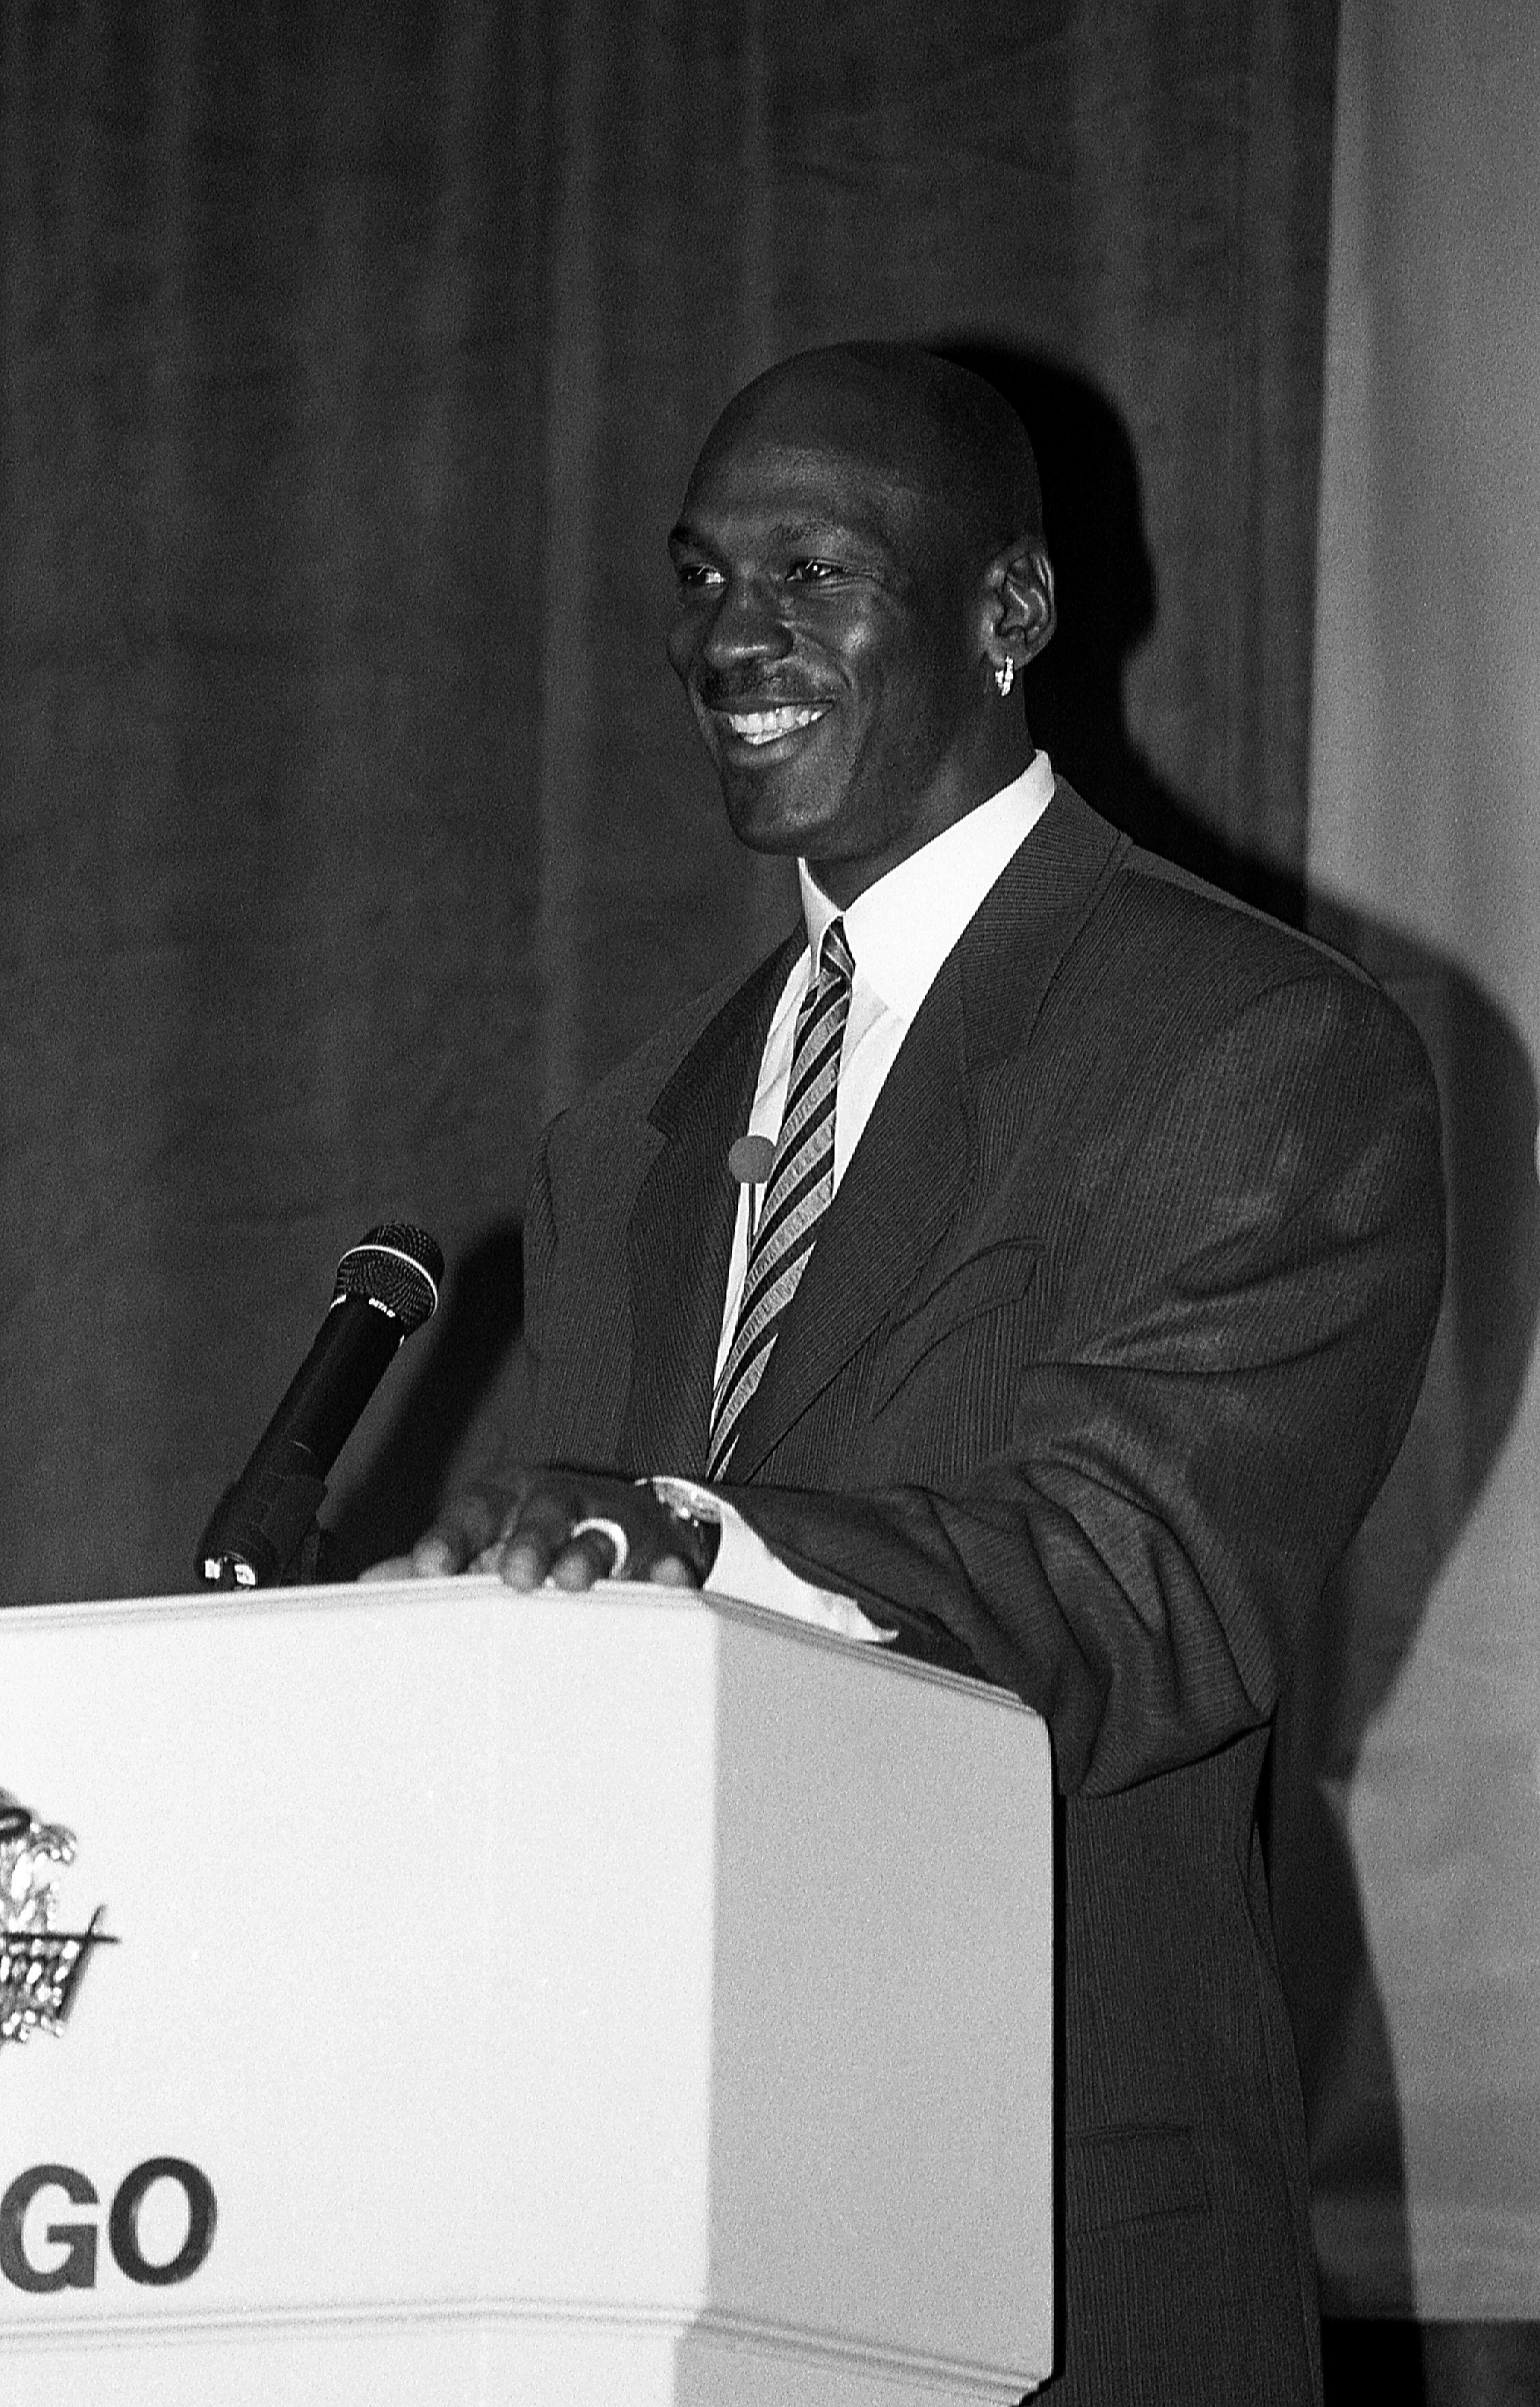 Michael Jordan speaks to the press before accepting his 1996 N.B.A. Finals Most Valuable Player award at the Fairmont Hotel in Chicago, Illinois in June 1996 | Source: Getty Images